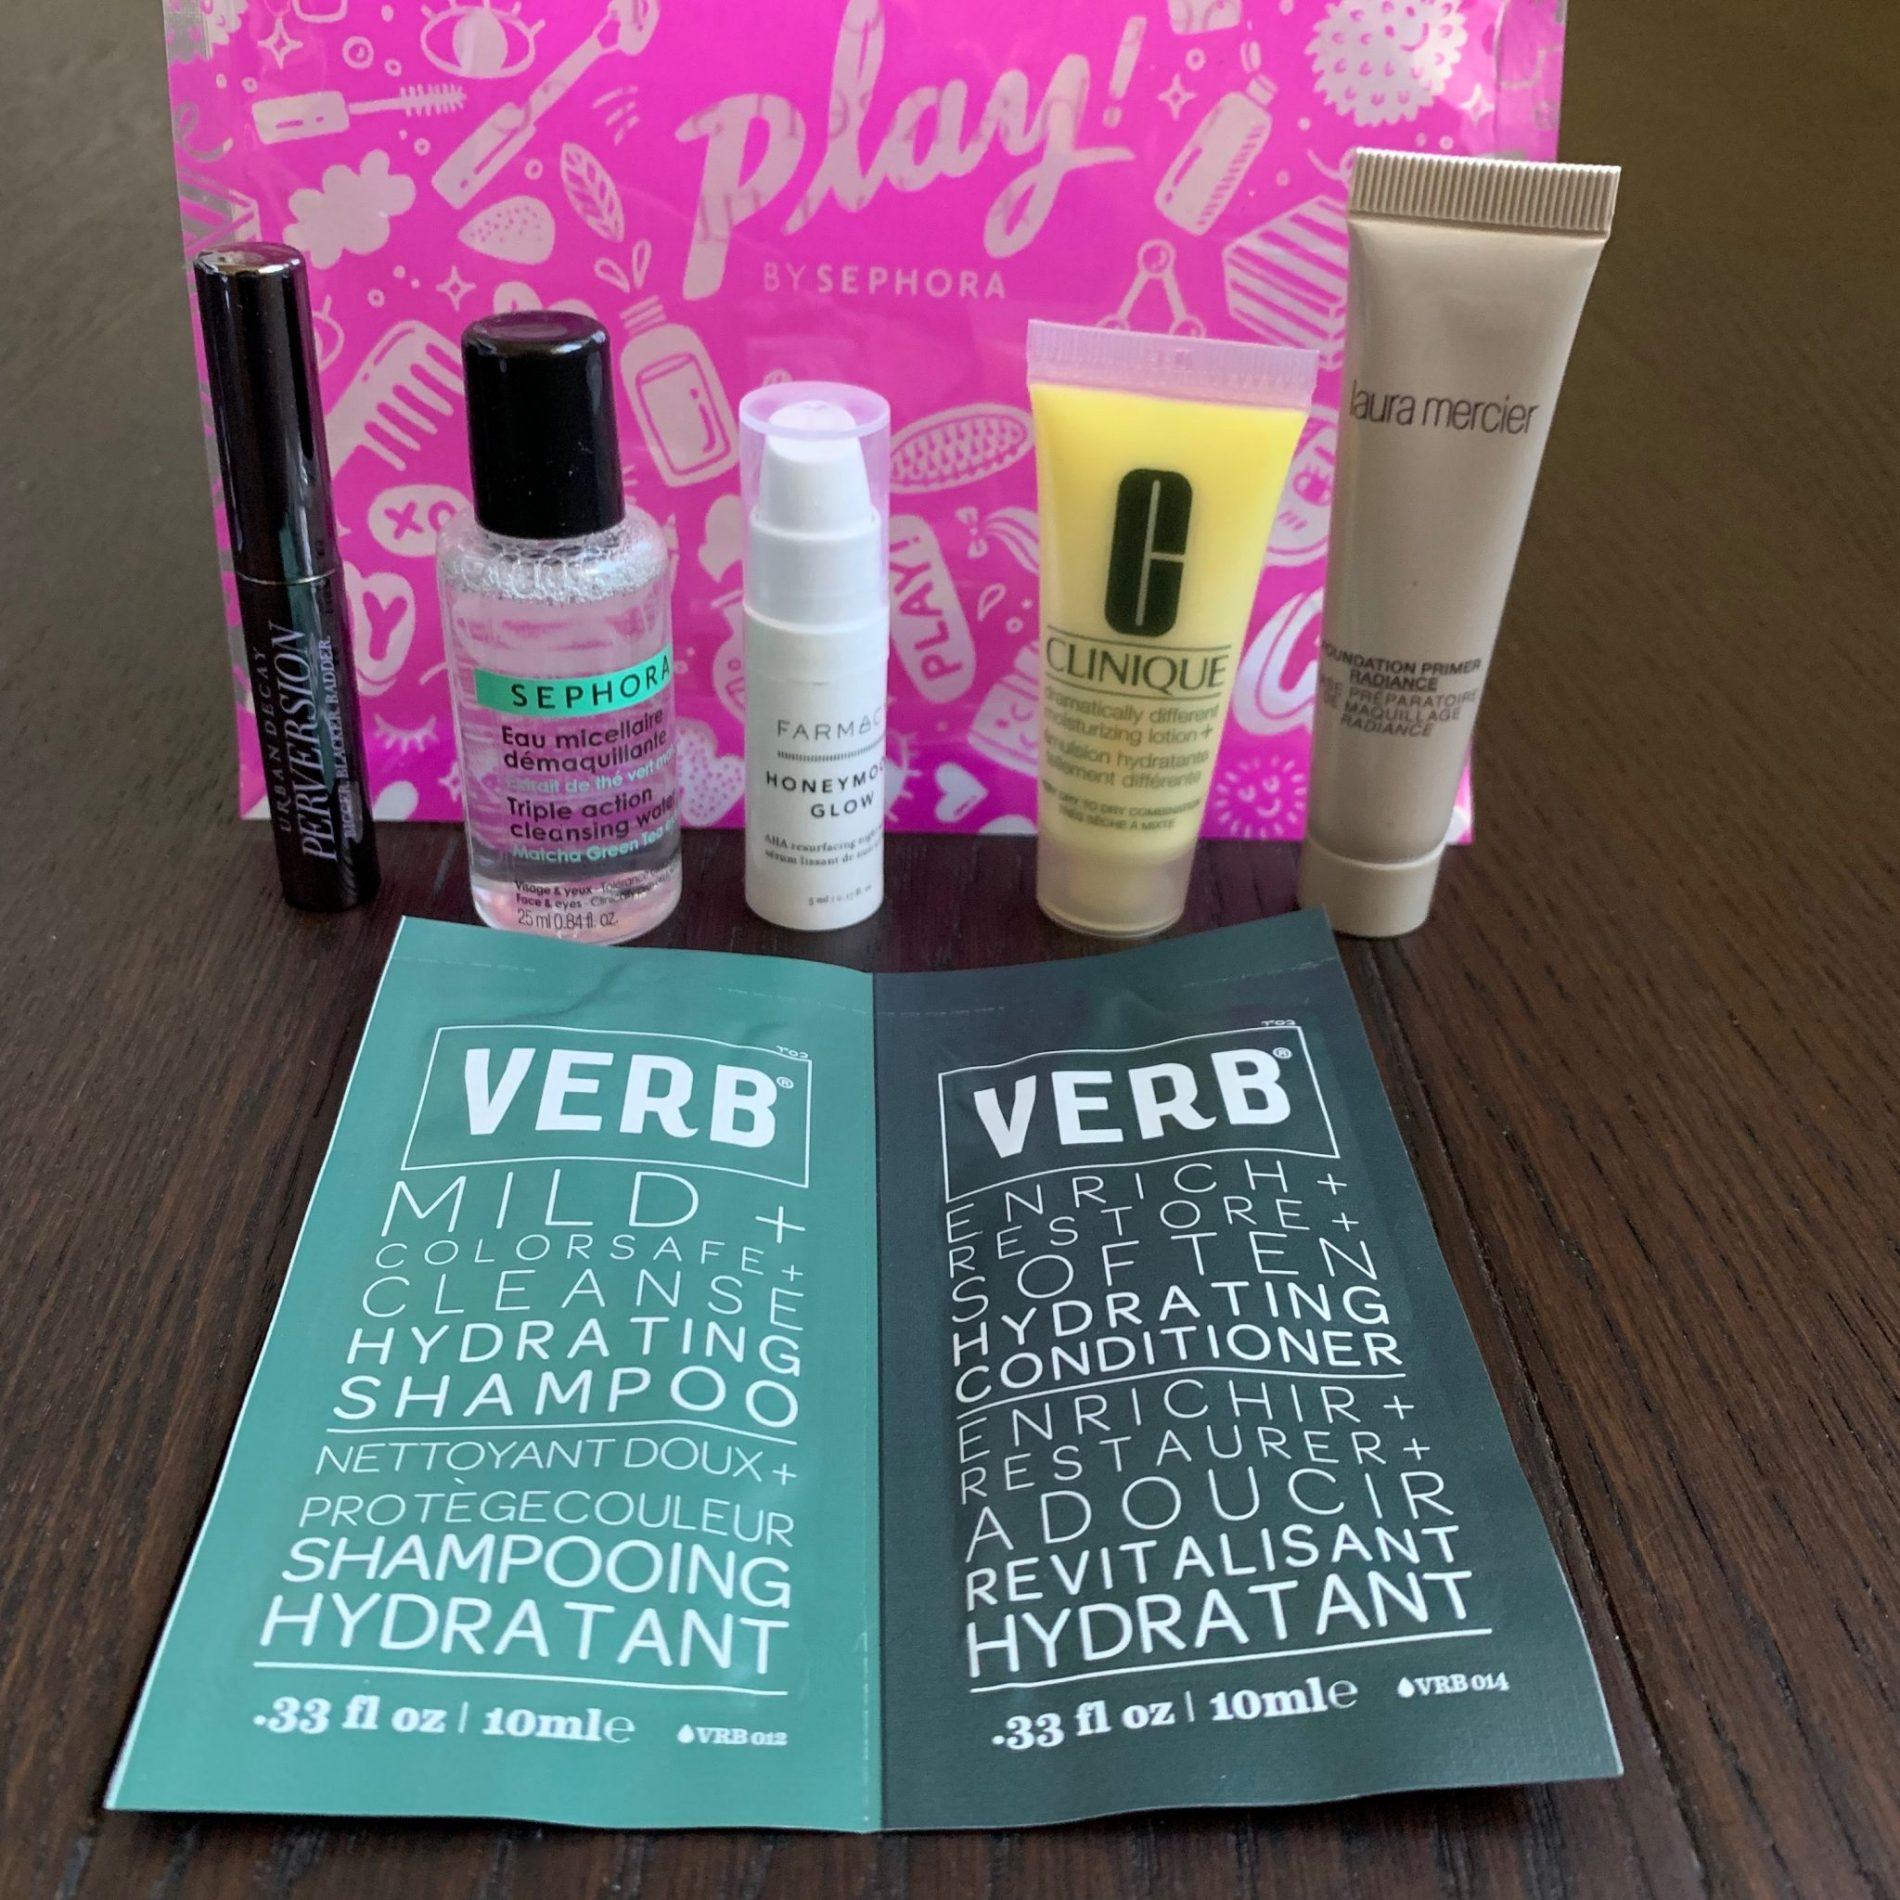 Play! by Sephora Review – April 2019